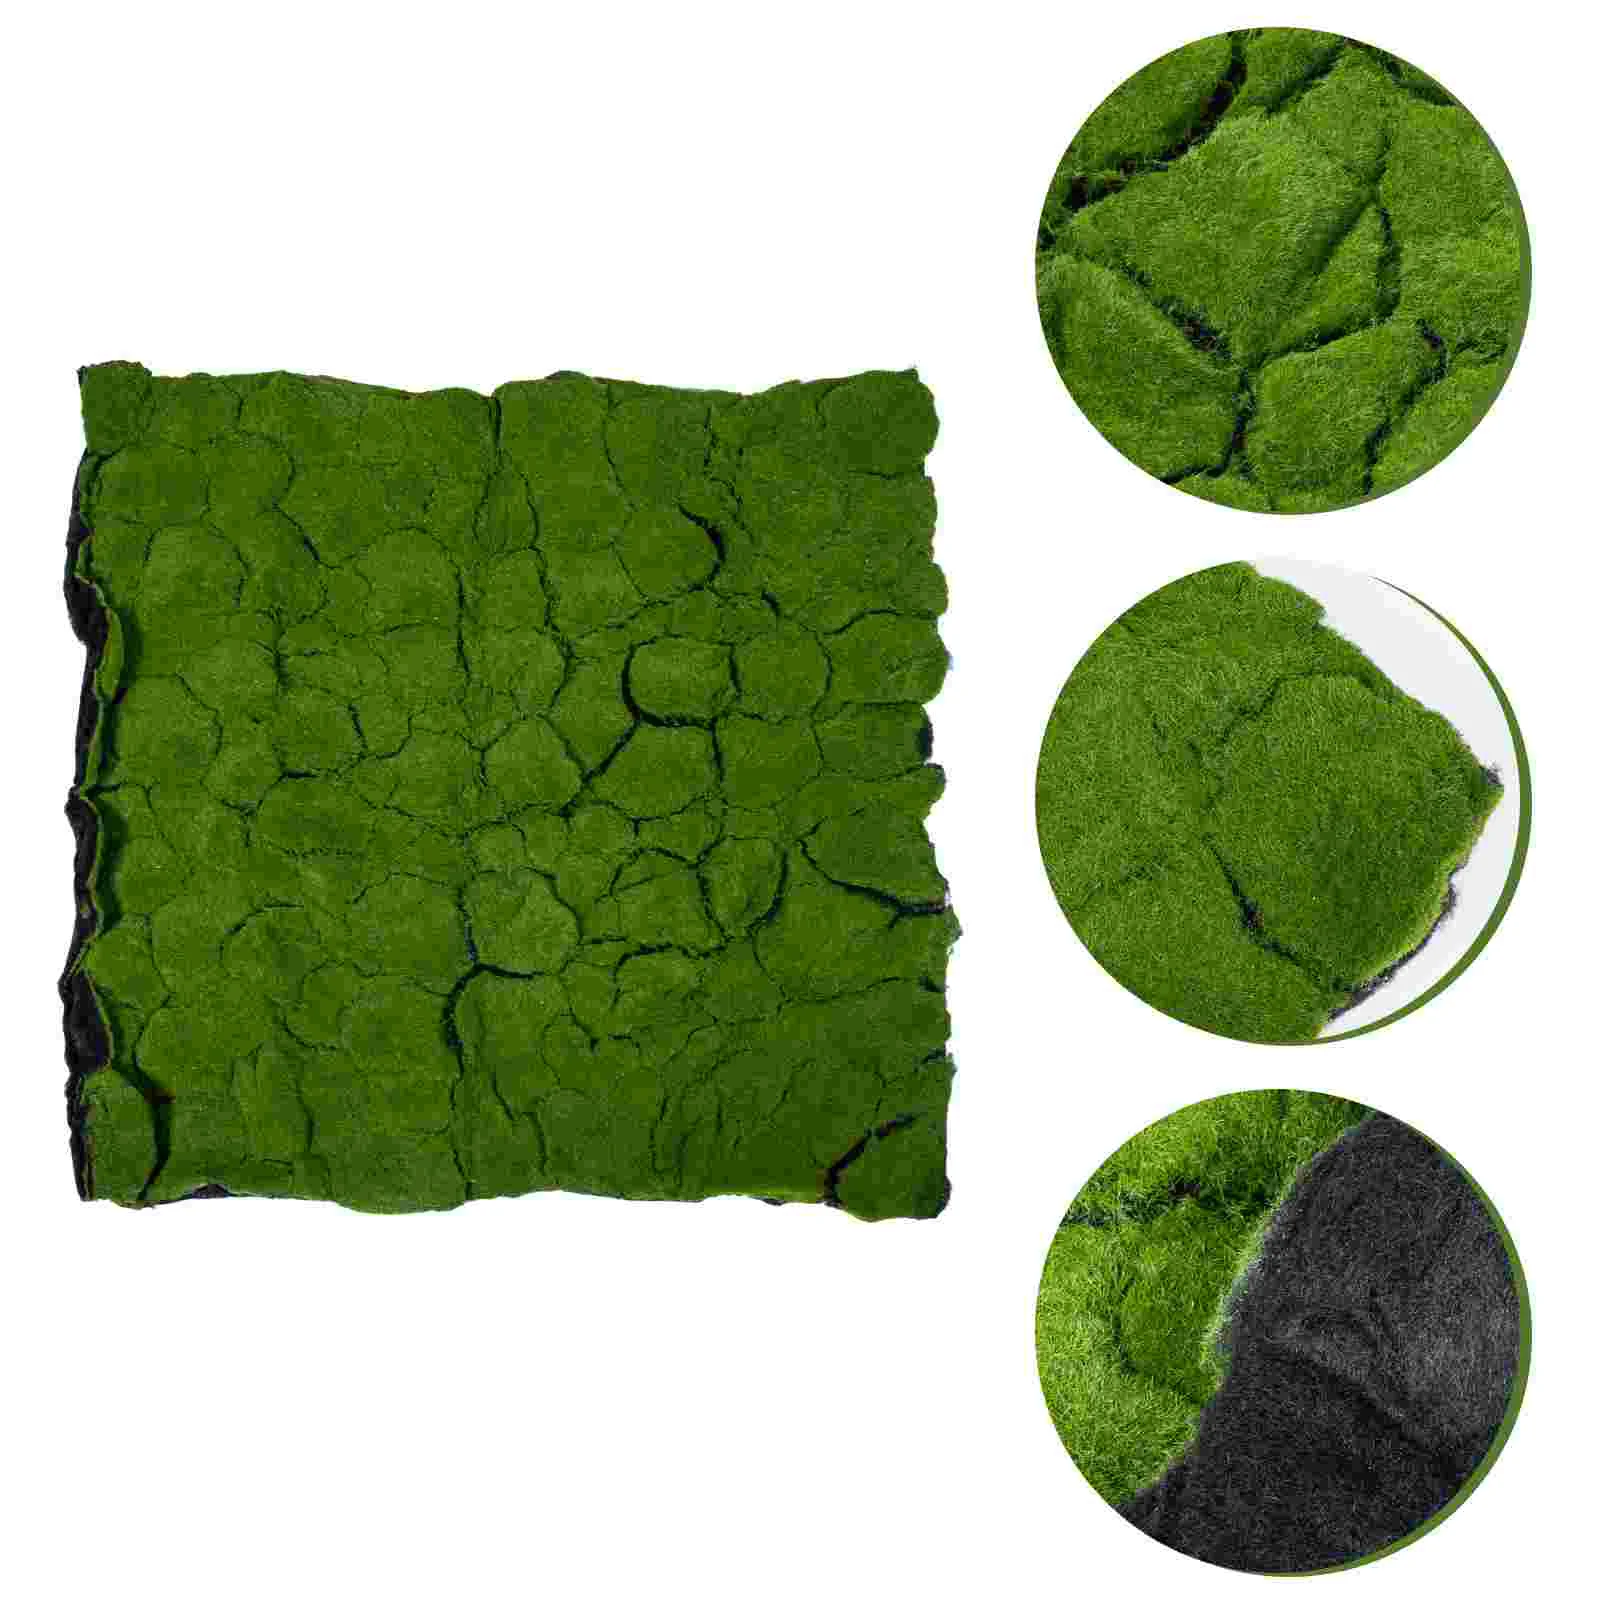 

Simulated Moss Lawn Realistic Faux Rug Artificial Grass Mat Fake Turf Green Garden Indoor Simulation Plants Wedding decoration